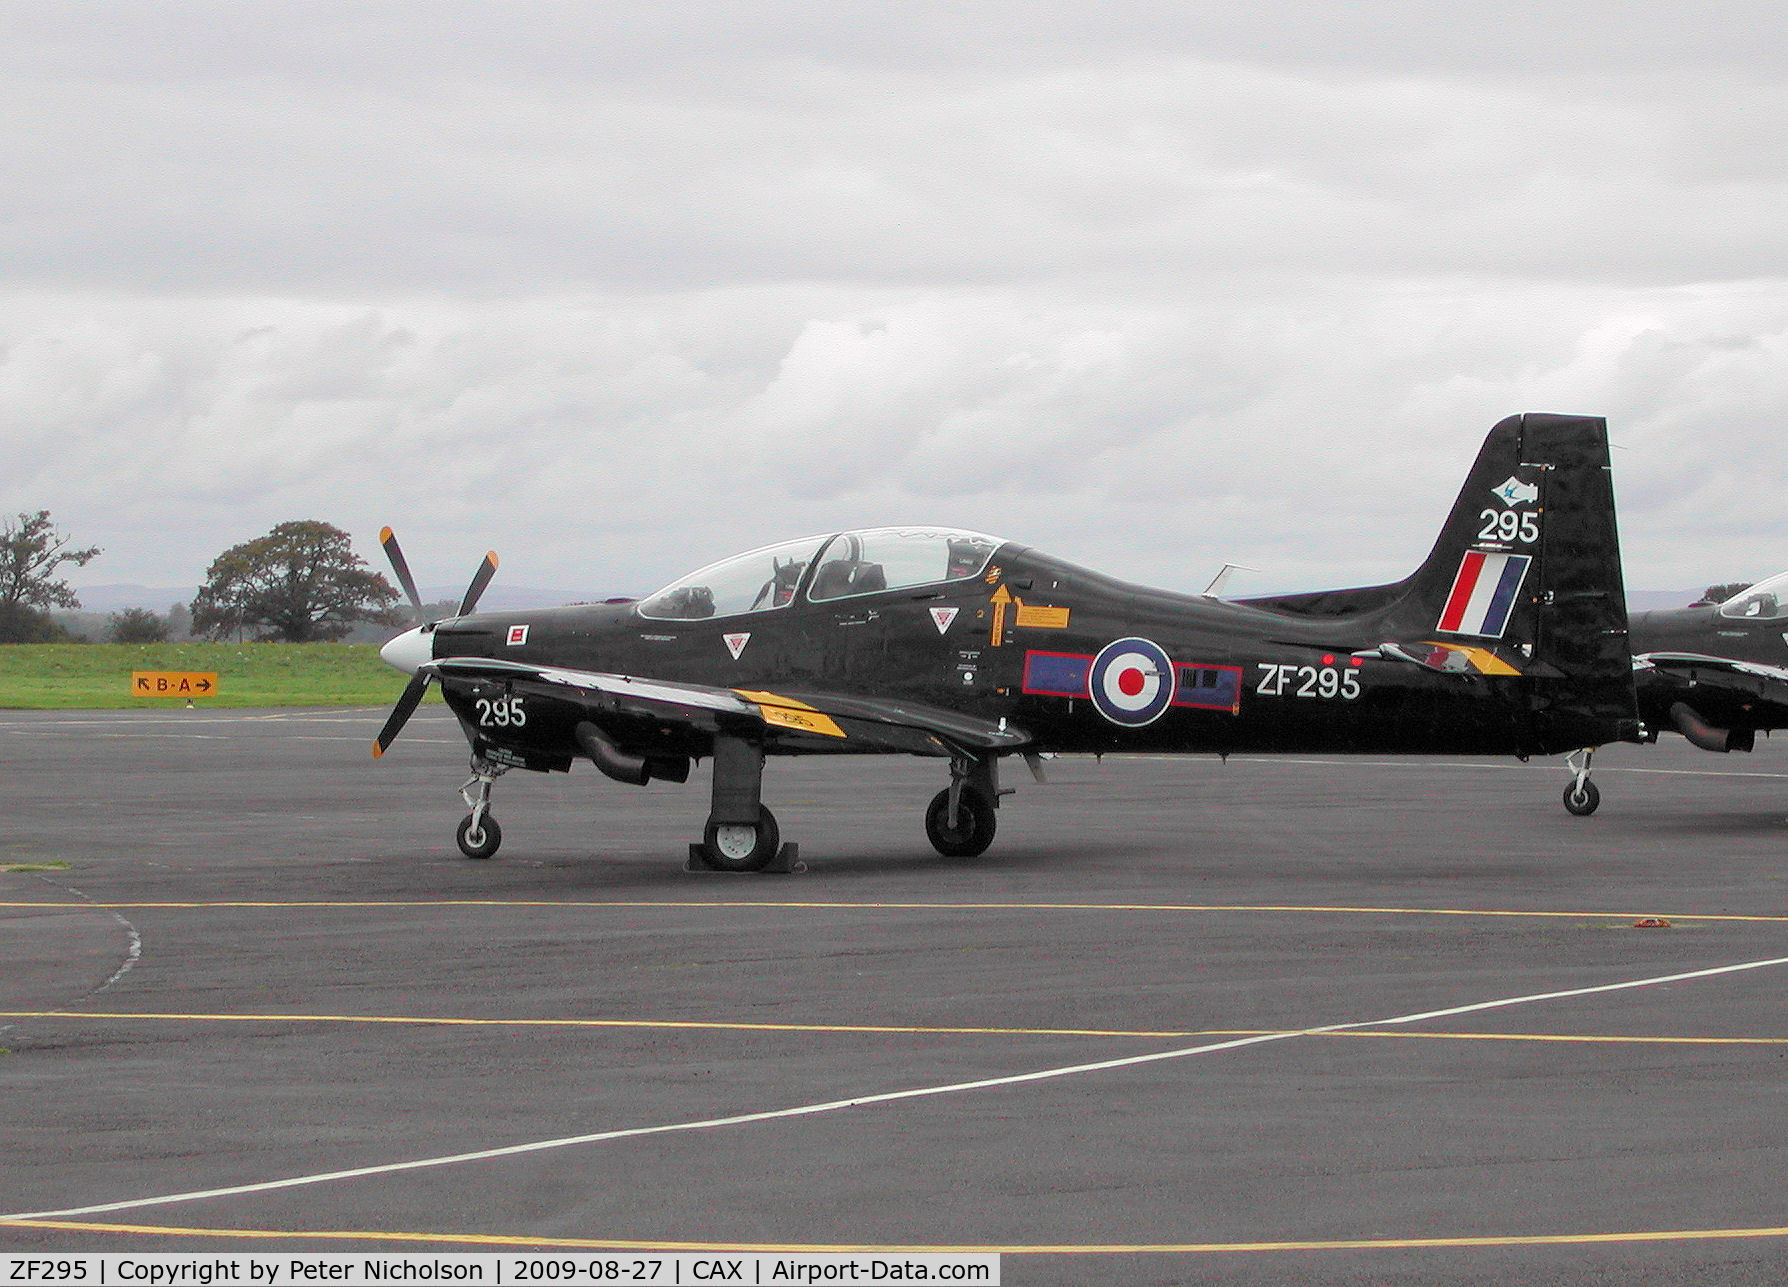 ZF295, 1991 Short S-312 Tucano T1 C/N S095/T66, Tucano T.1 of 1 Flying Training School at RAF Linton-on-Ouse on a visit to Carlisle in the Summer of 2009.